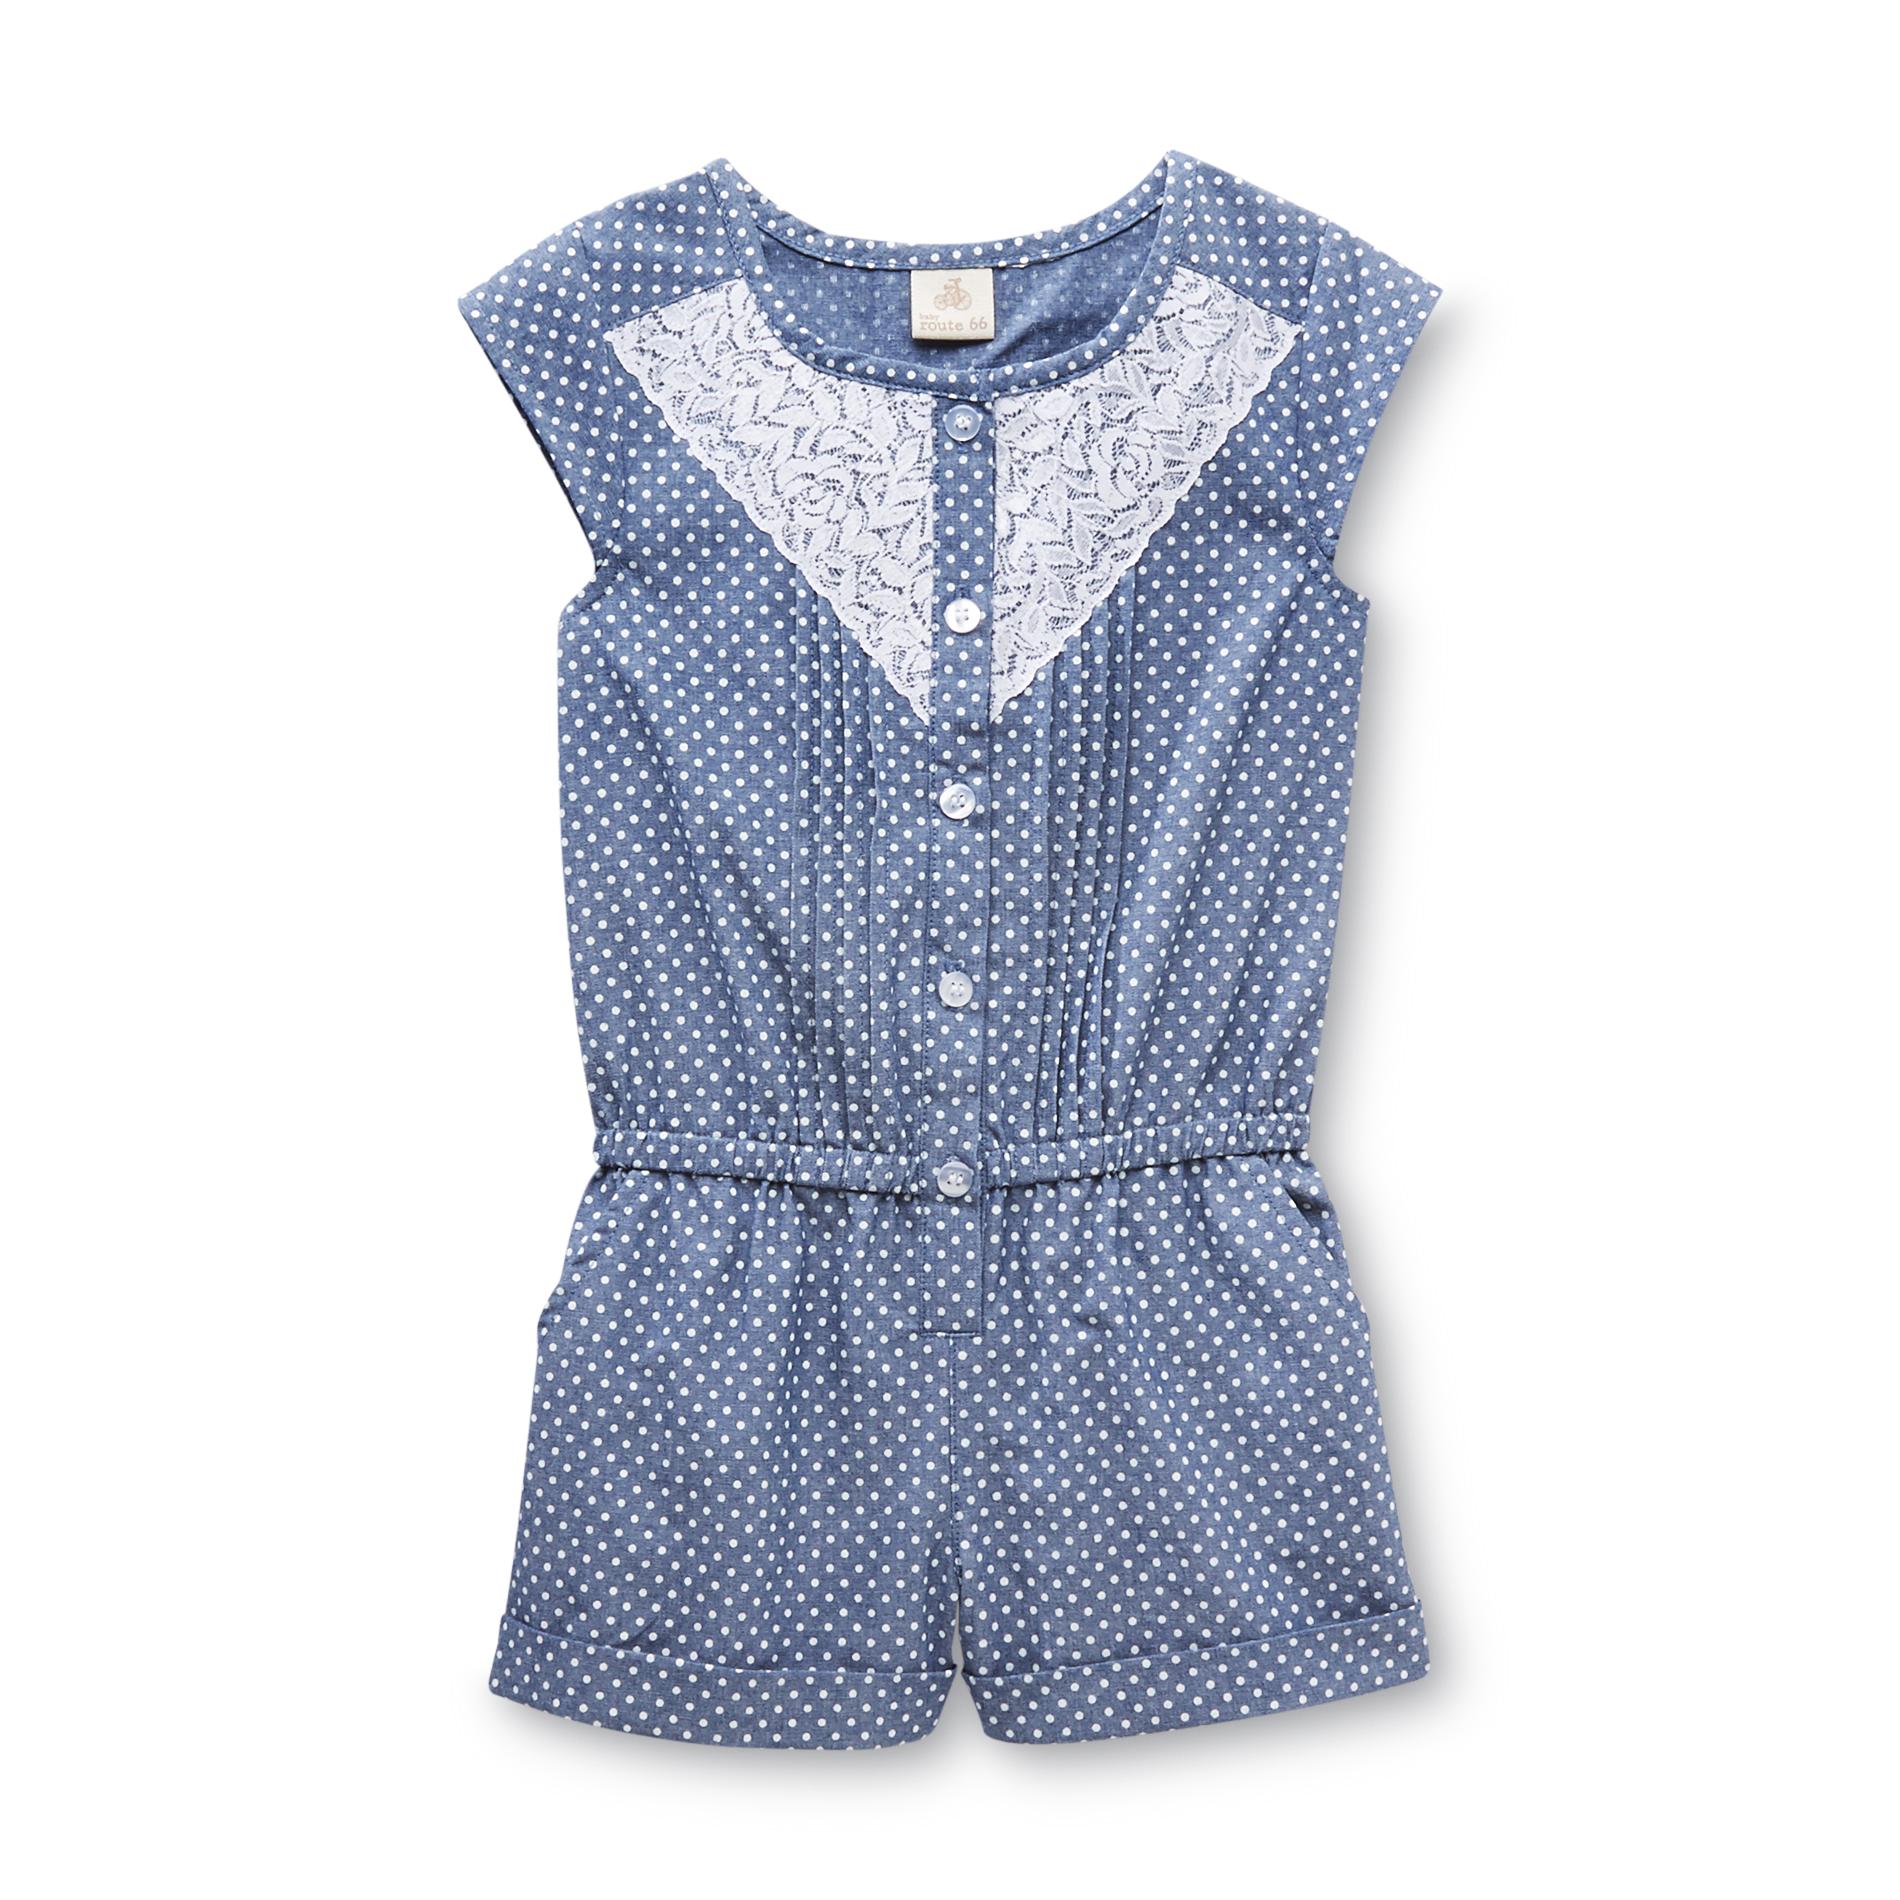 Route 66 Infant & Toddler Girl's Chambray Romper - Polka Dots